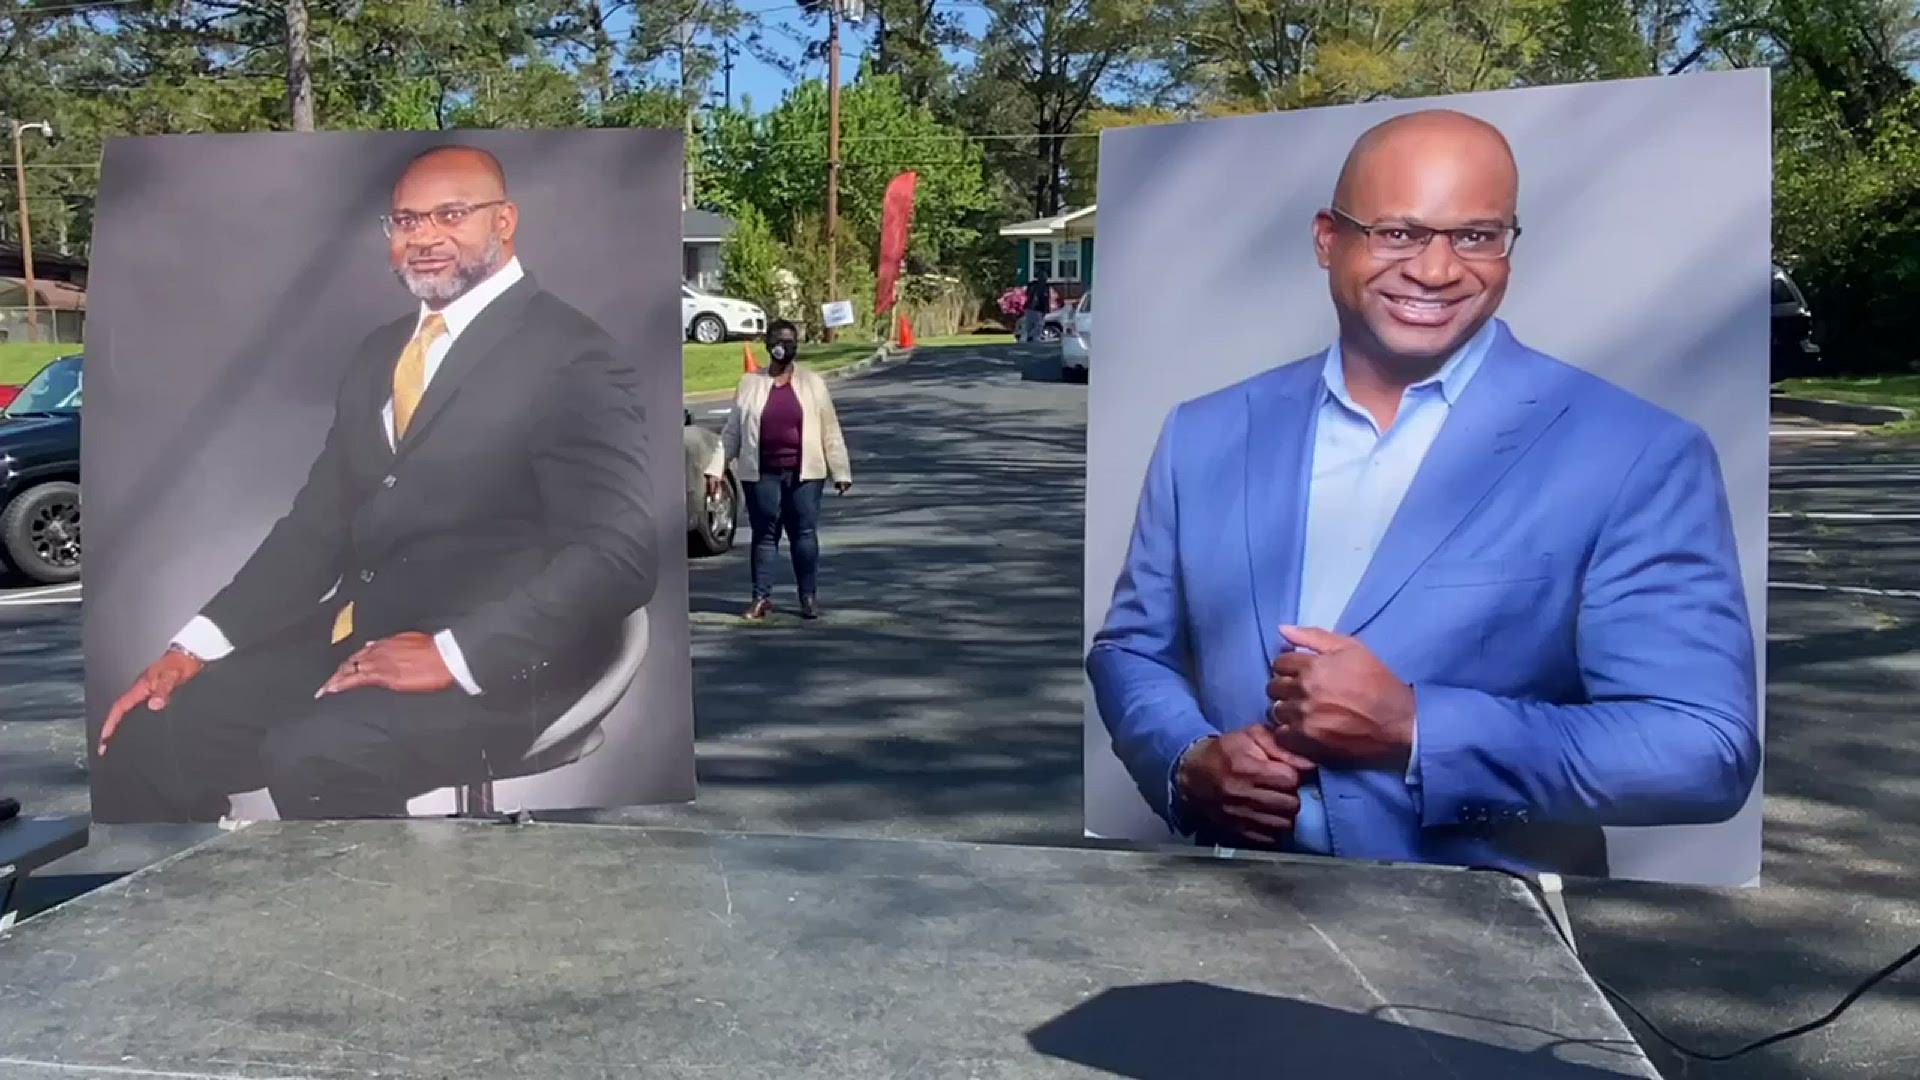 The 44-year-old pastor lost his battle with COVID-19 in February.